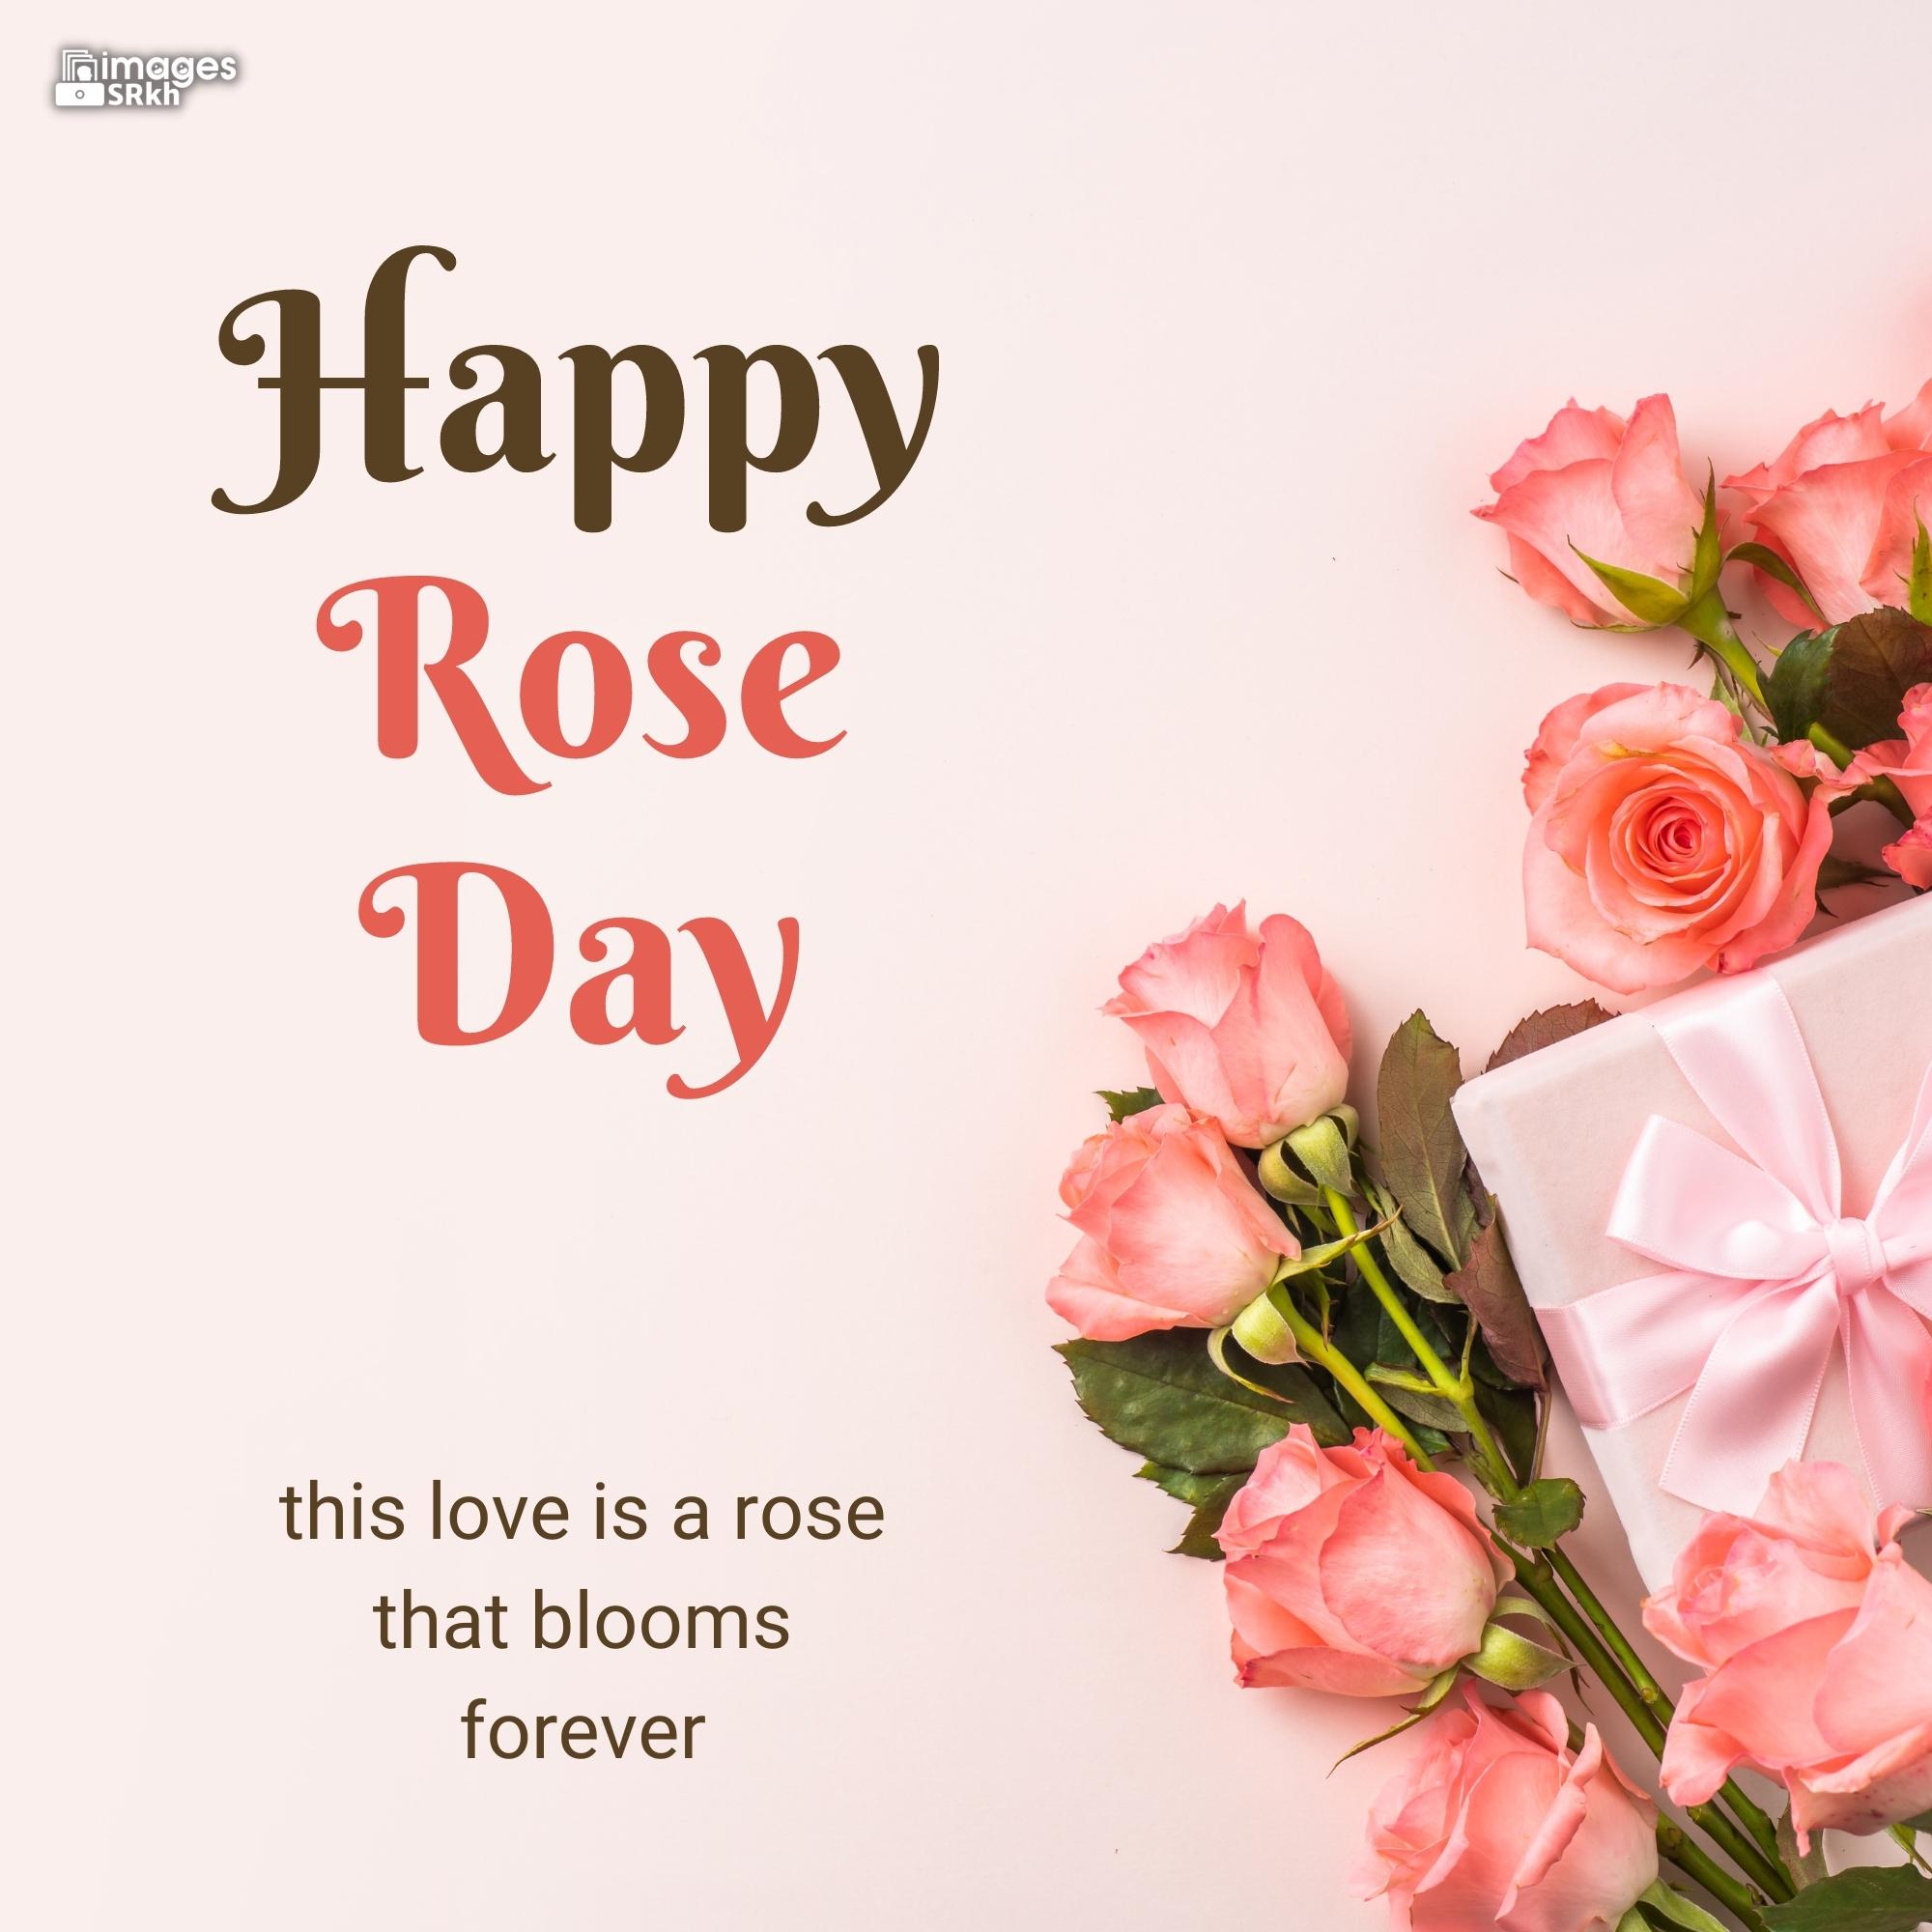 Happy Rose Day Image Hd Download (58)